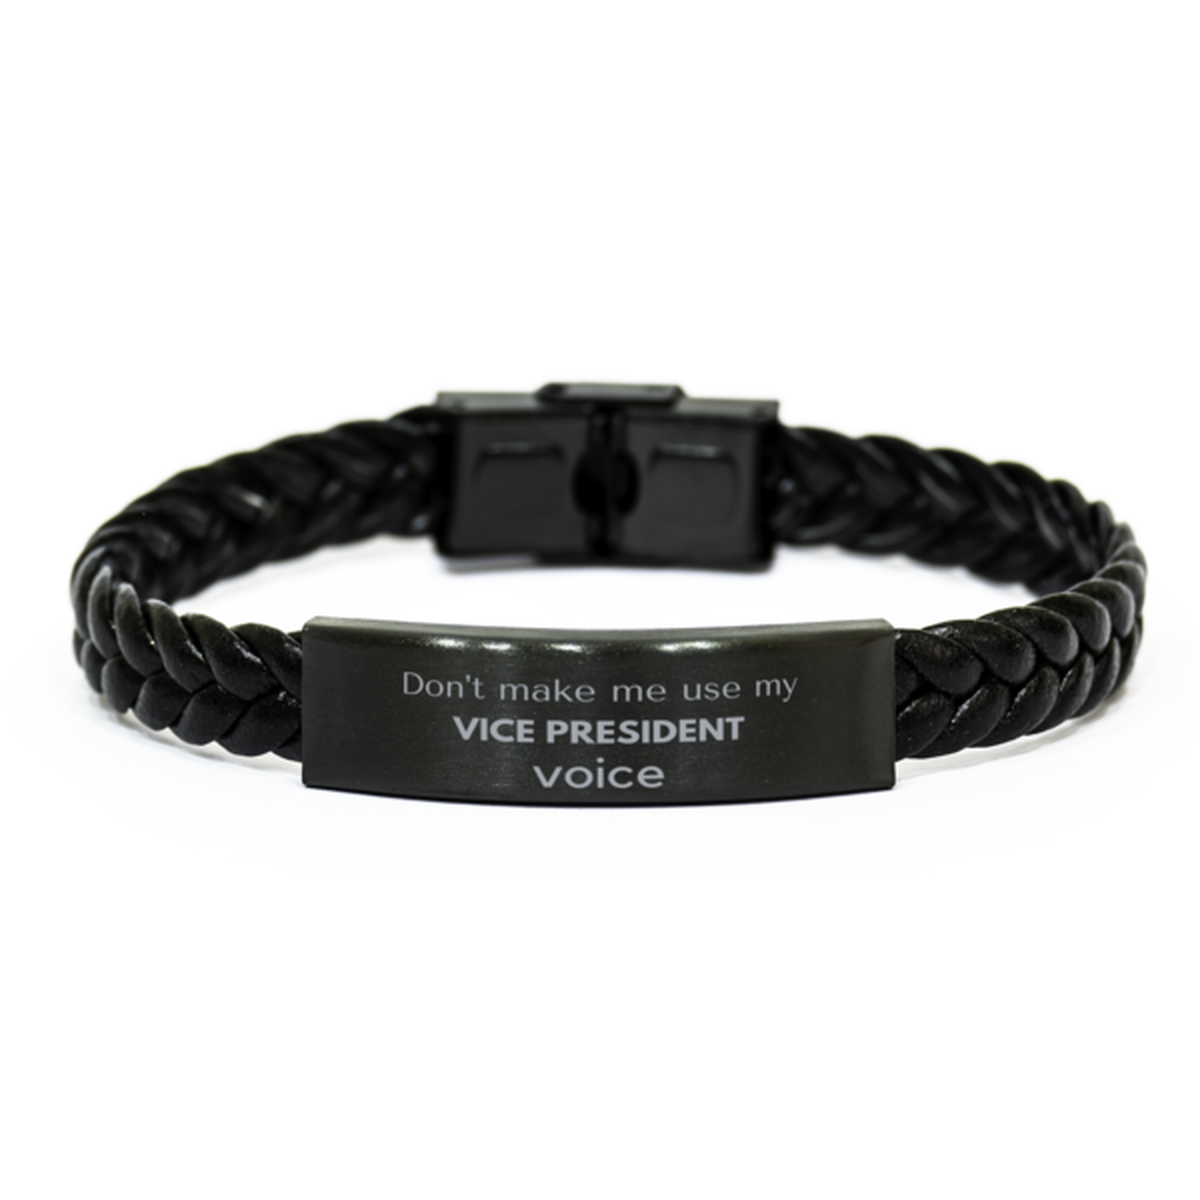 Don't make me use my Vice President voice, Sarcasm Vice President Gifts, Christmas Vice President Braided Leather Bracelet Birthday Unique Gifts For Vice President Coworkers, Men, Women, Colleague, Friends